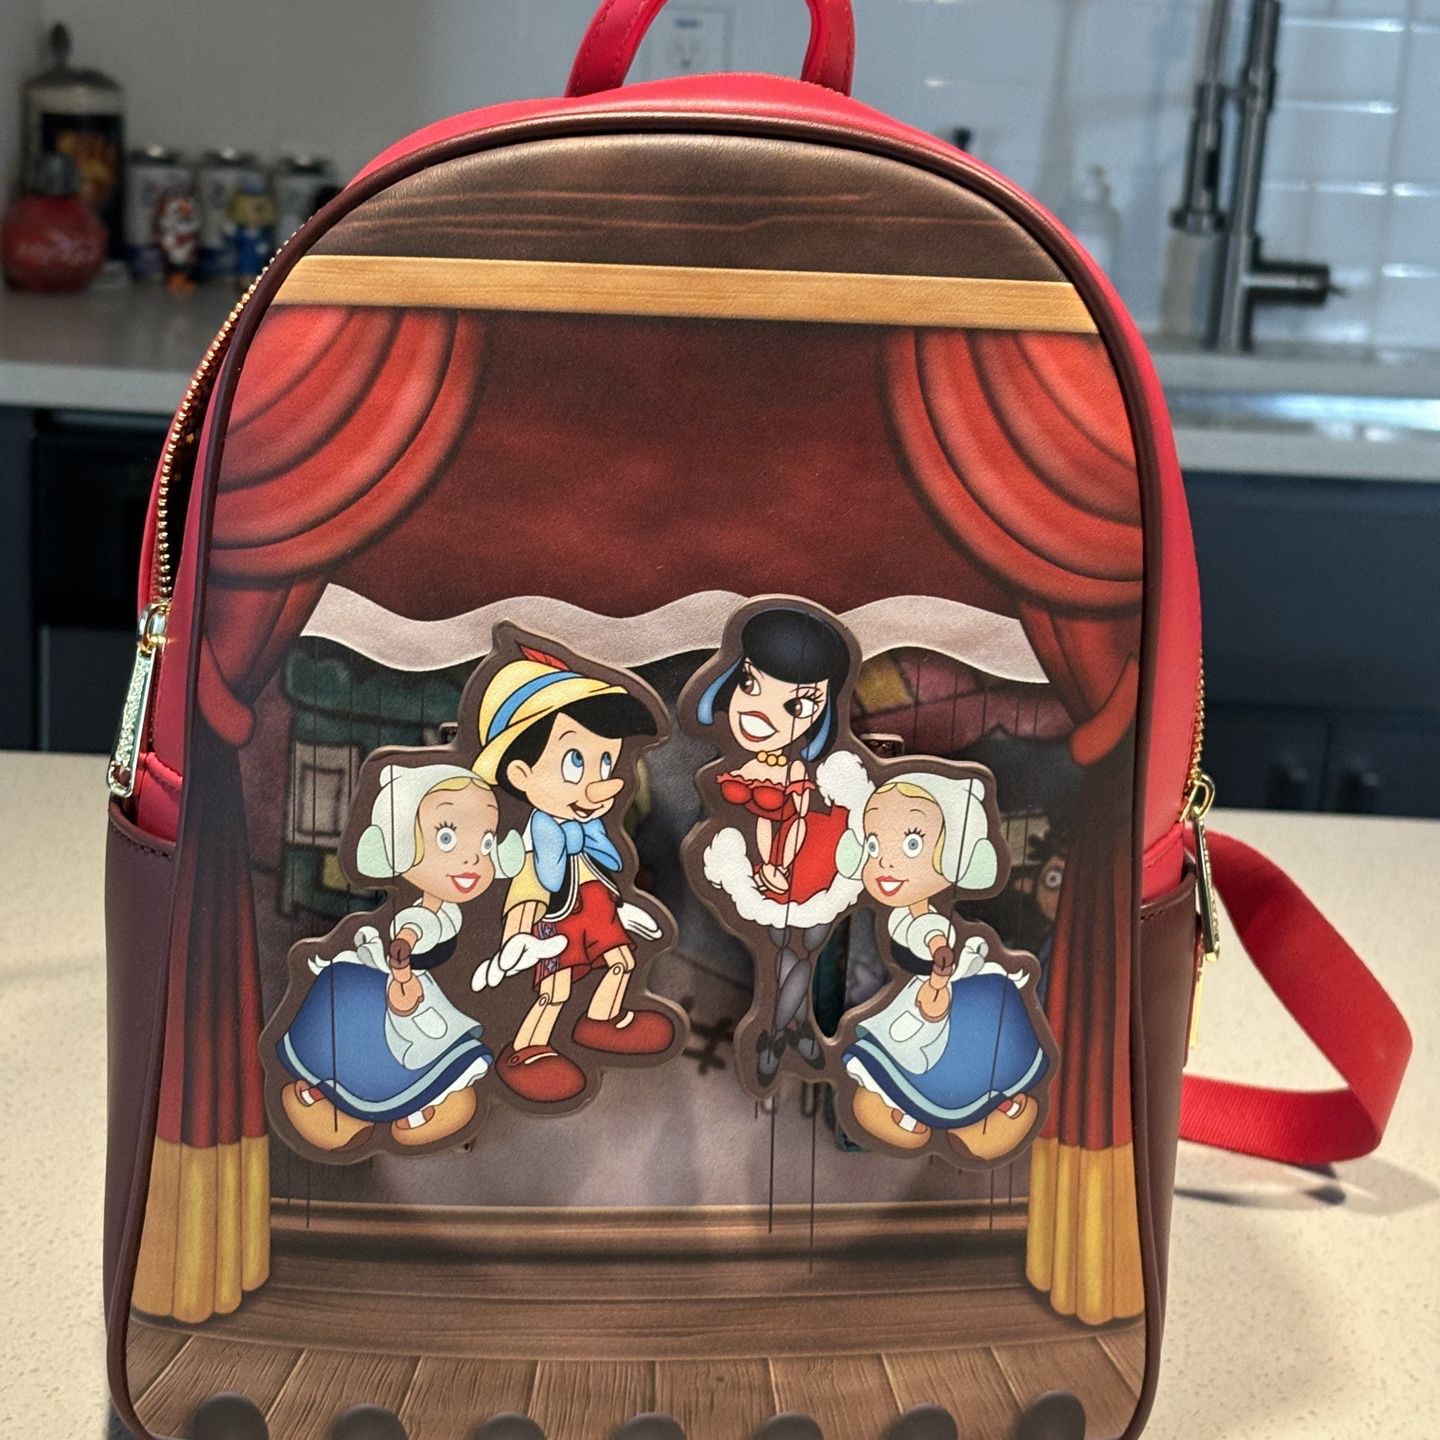 Disney Loungefly Bag For A Great Price